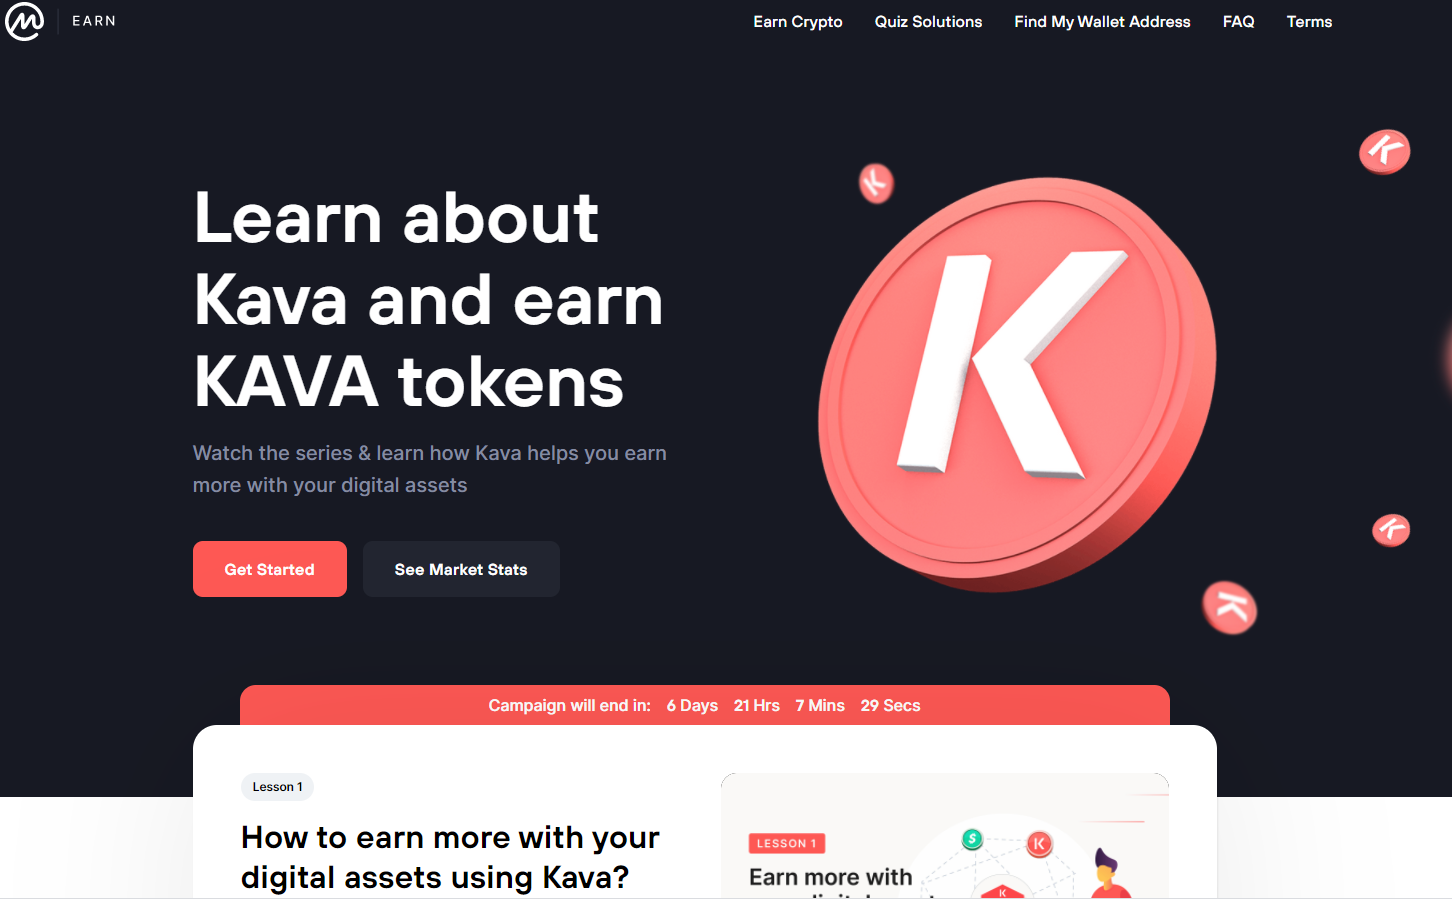 Free Crypto: Up to 10 $ worth of KAVA by CoinmarketCap